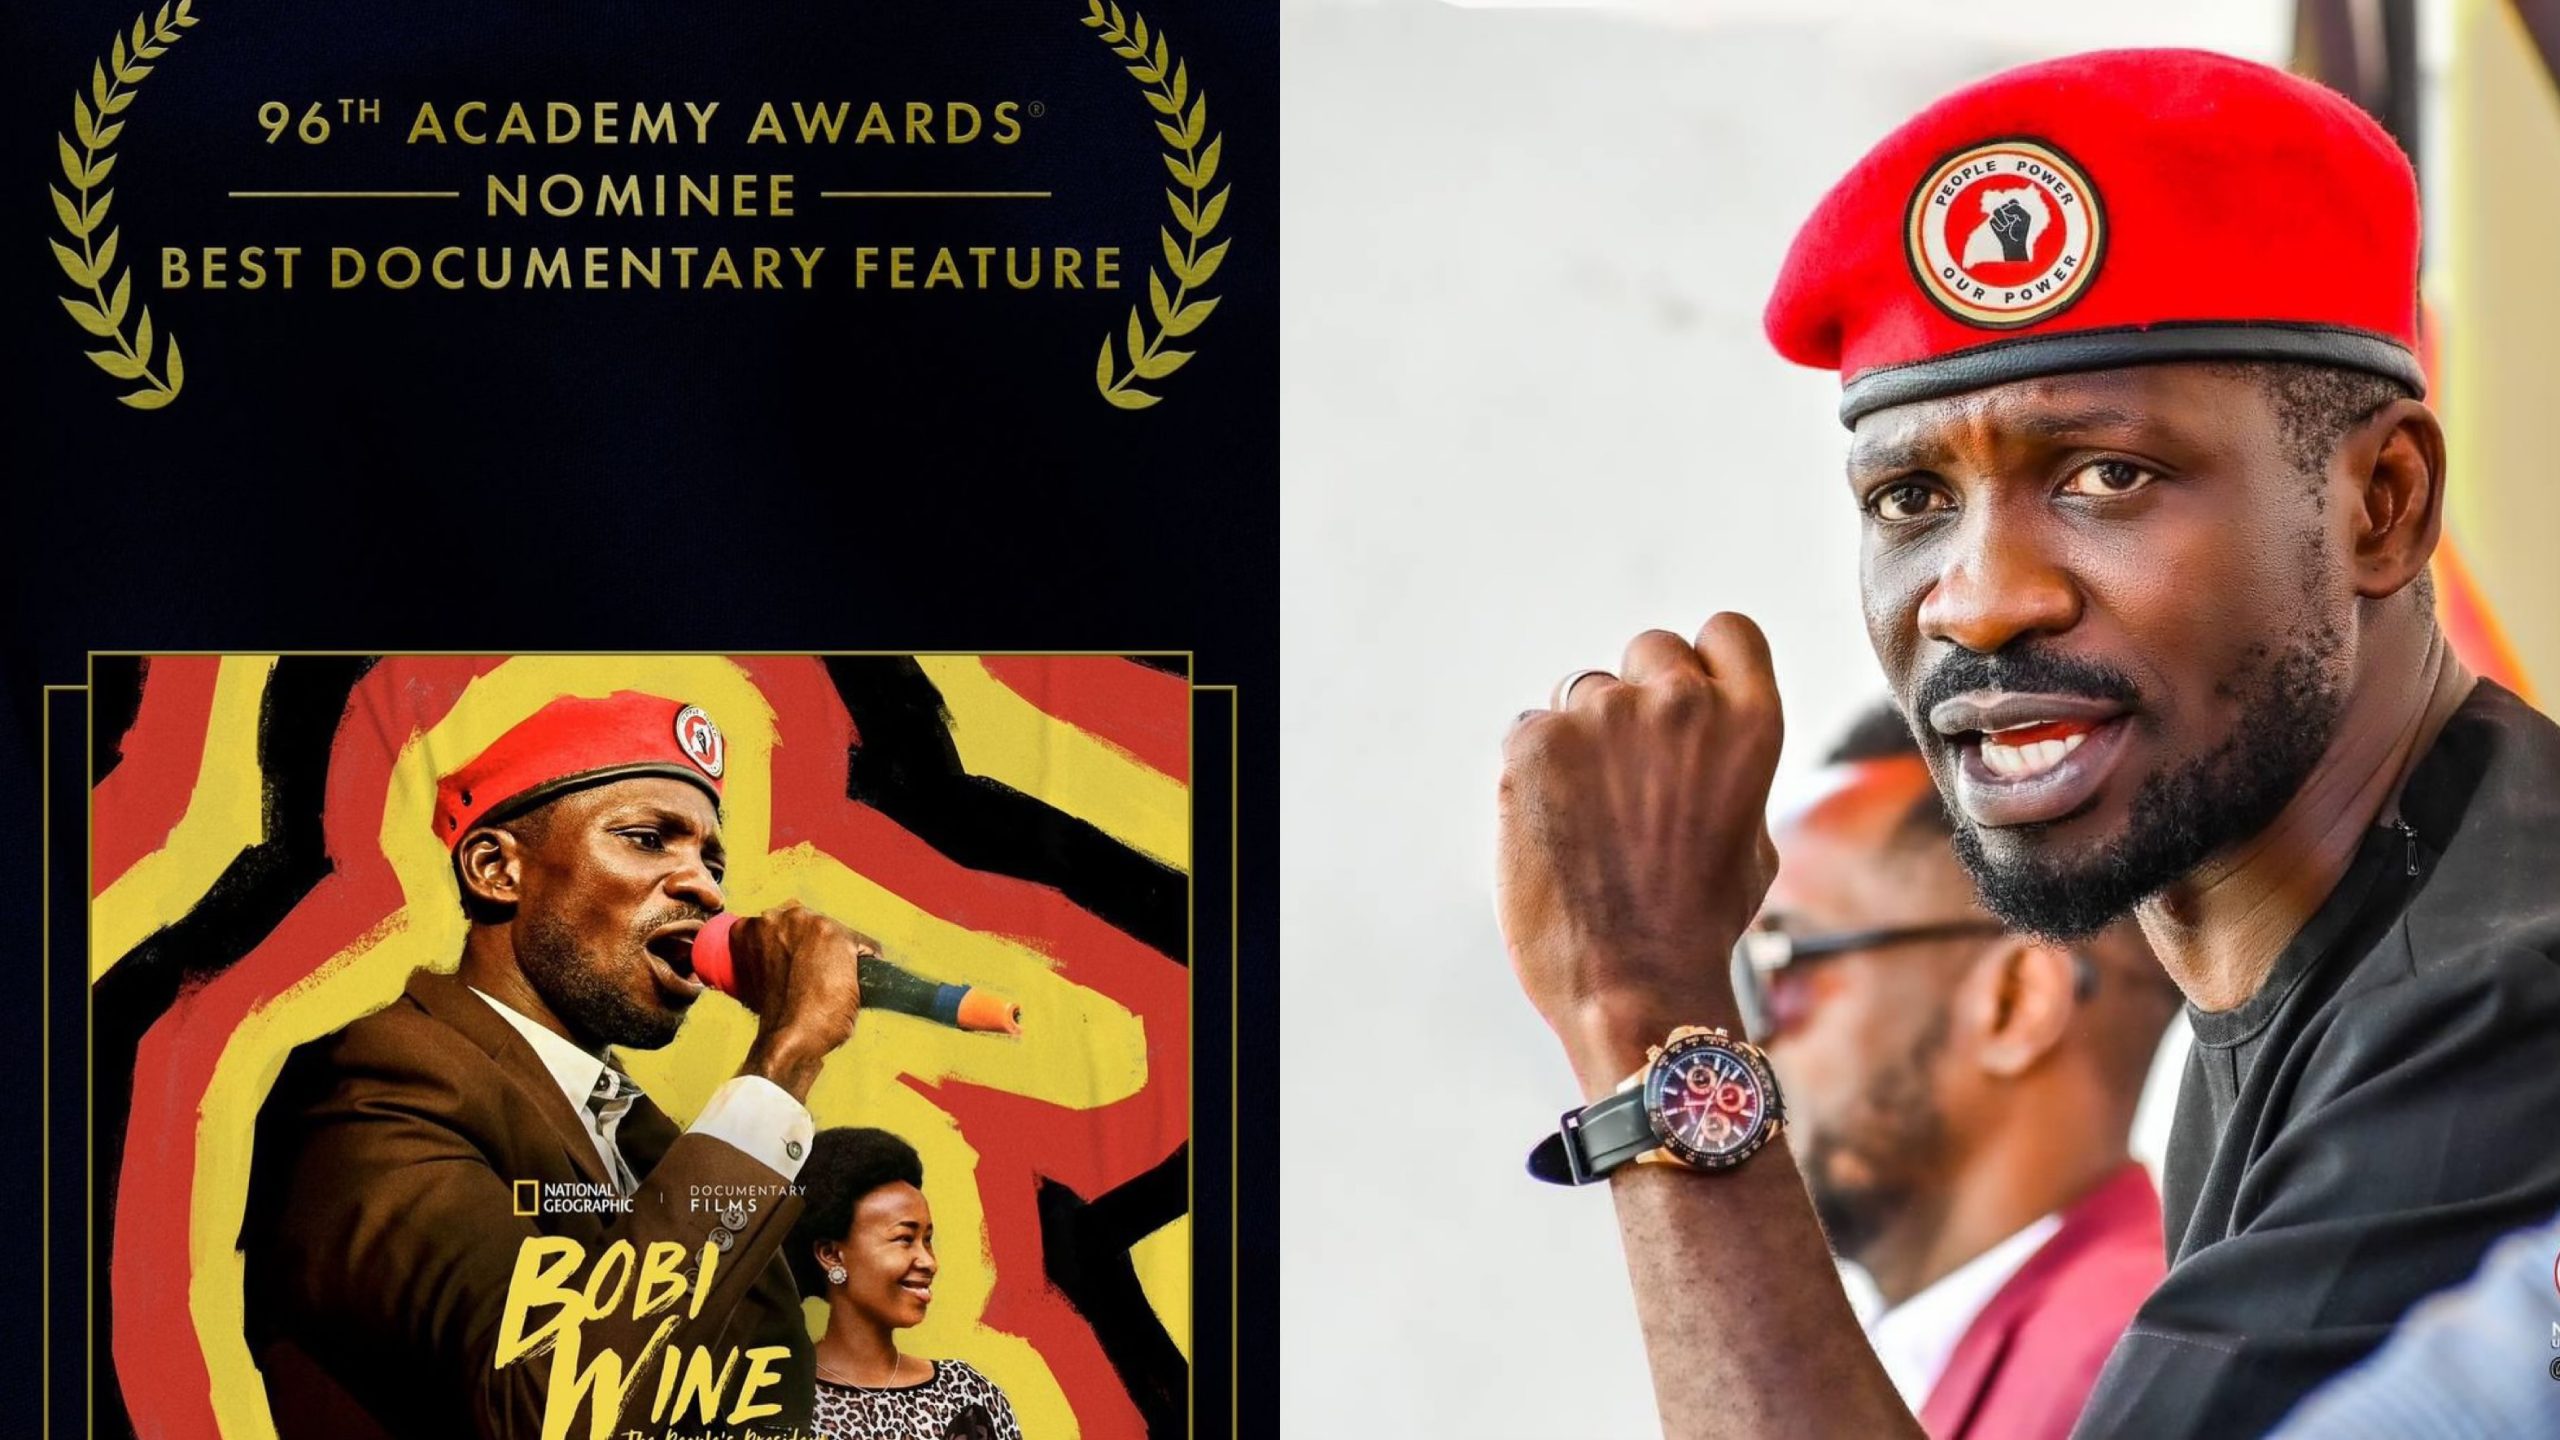 Bobi Wine The People’s President documentary gets nominated in the